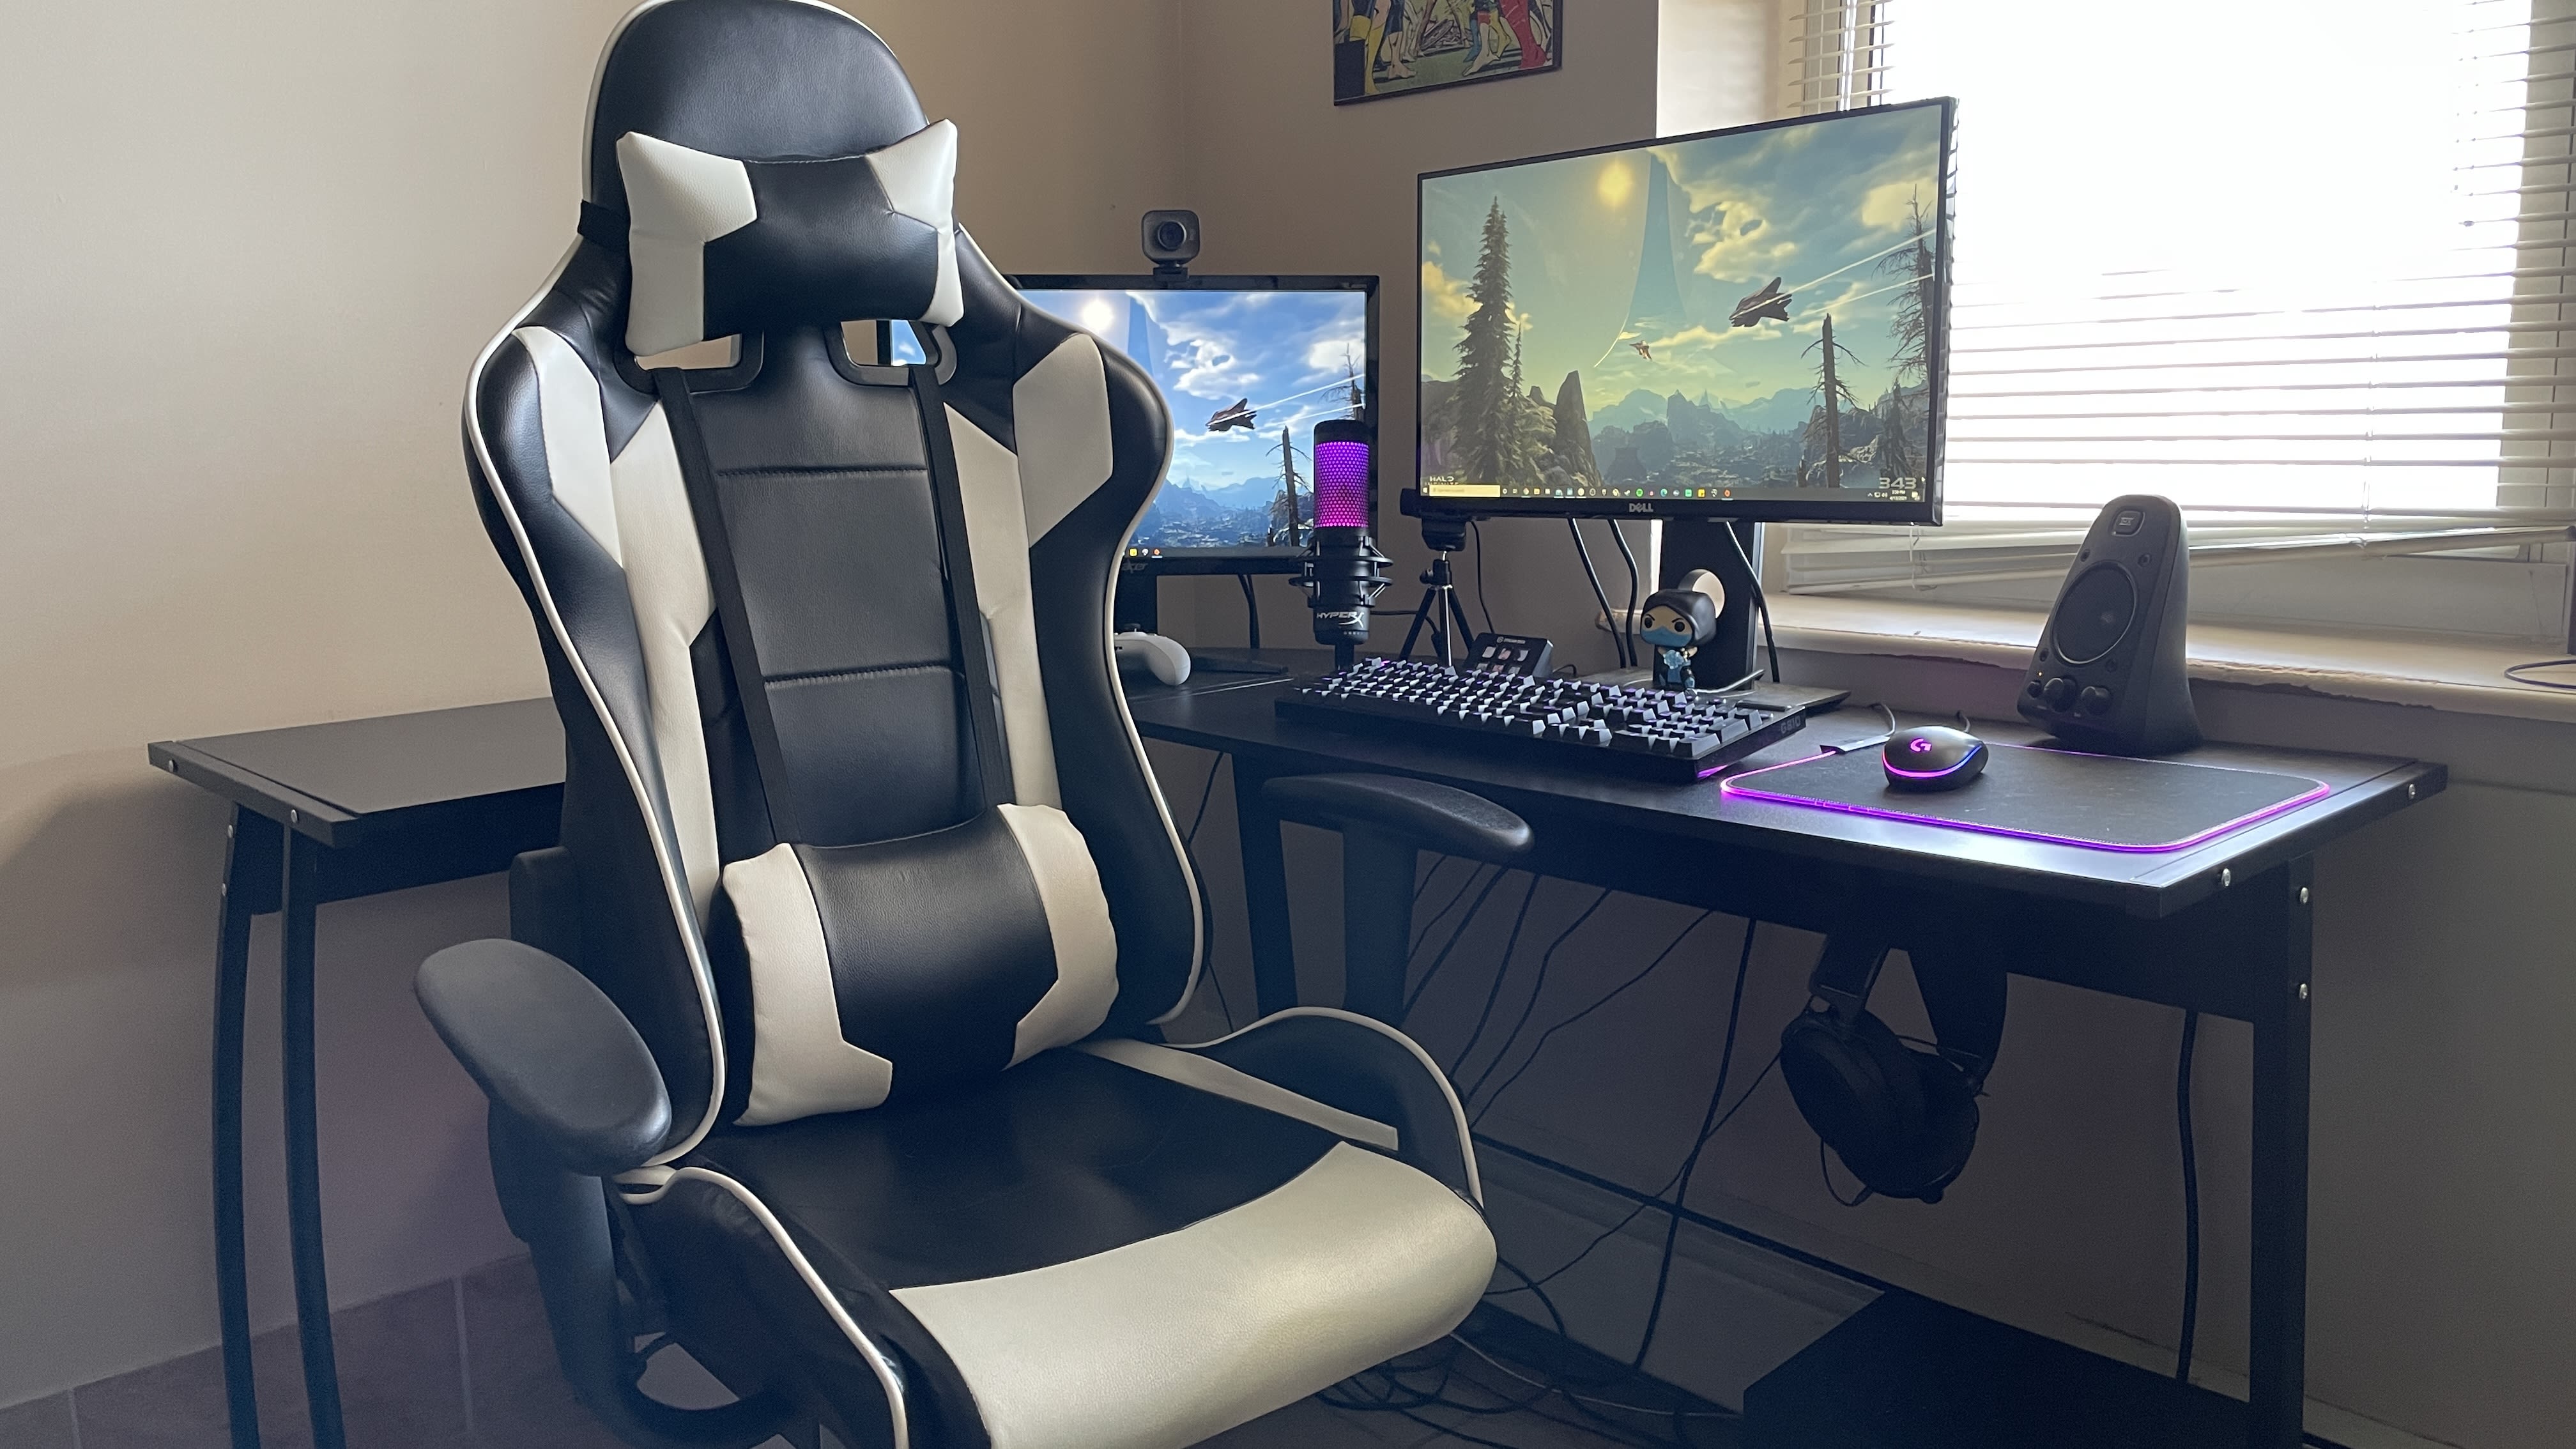 Stylish Gammer chair design with wheels - Gaming Chair Design Ideas - modern computer chair design picture for freelancer and gamer - mrlaboratory.in